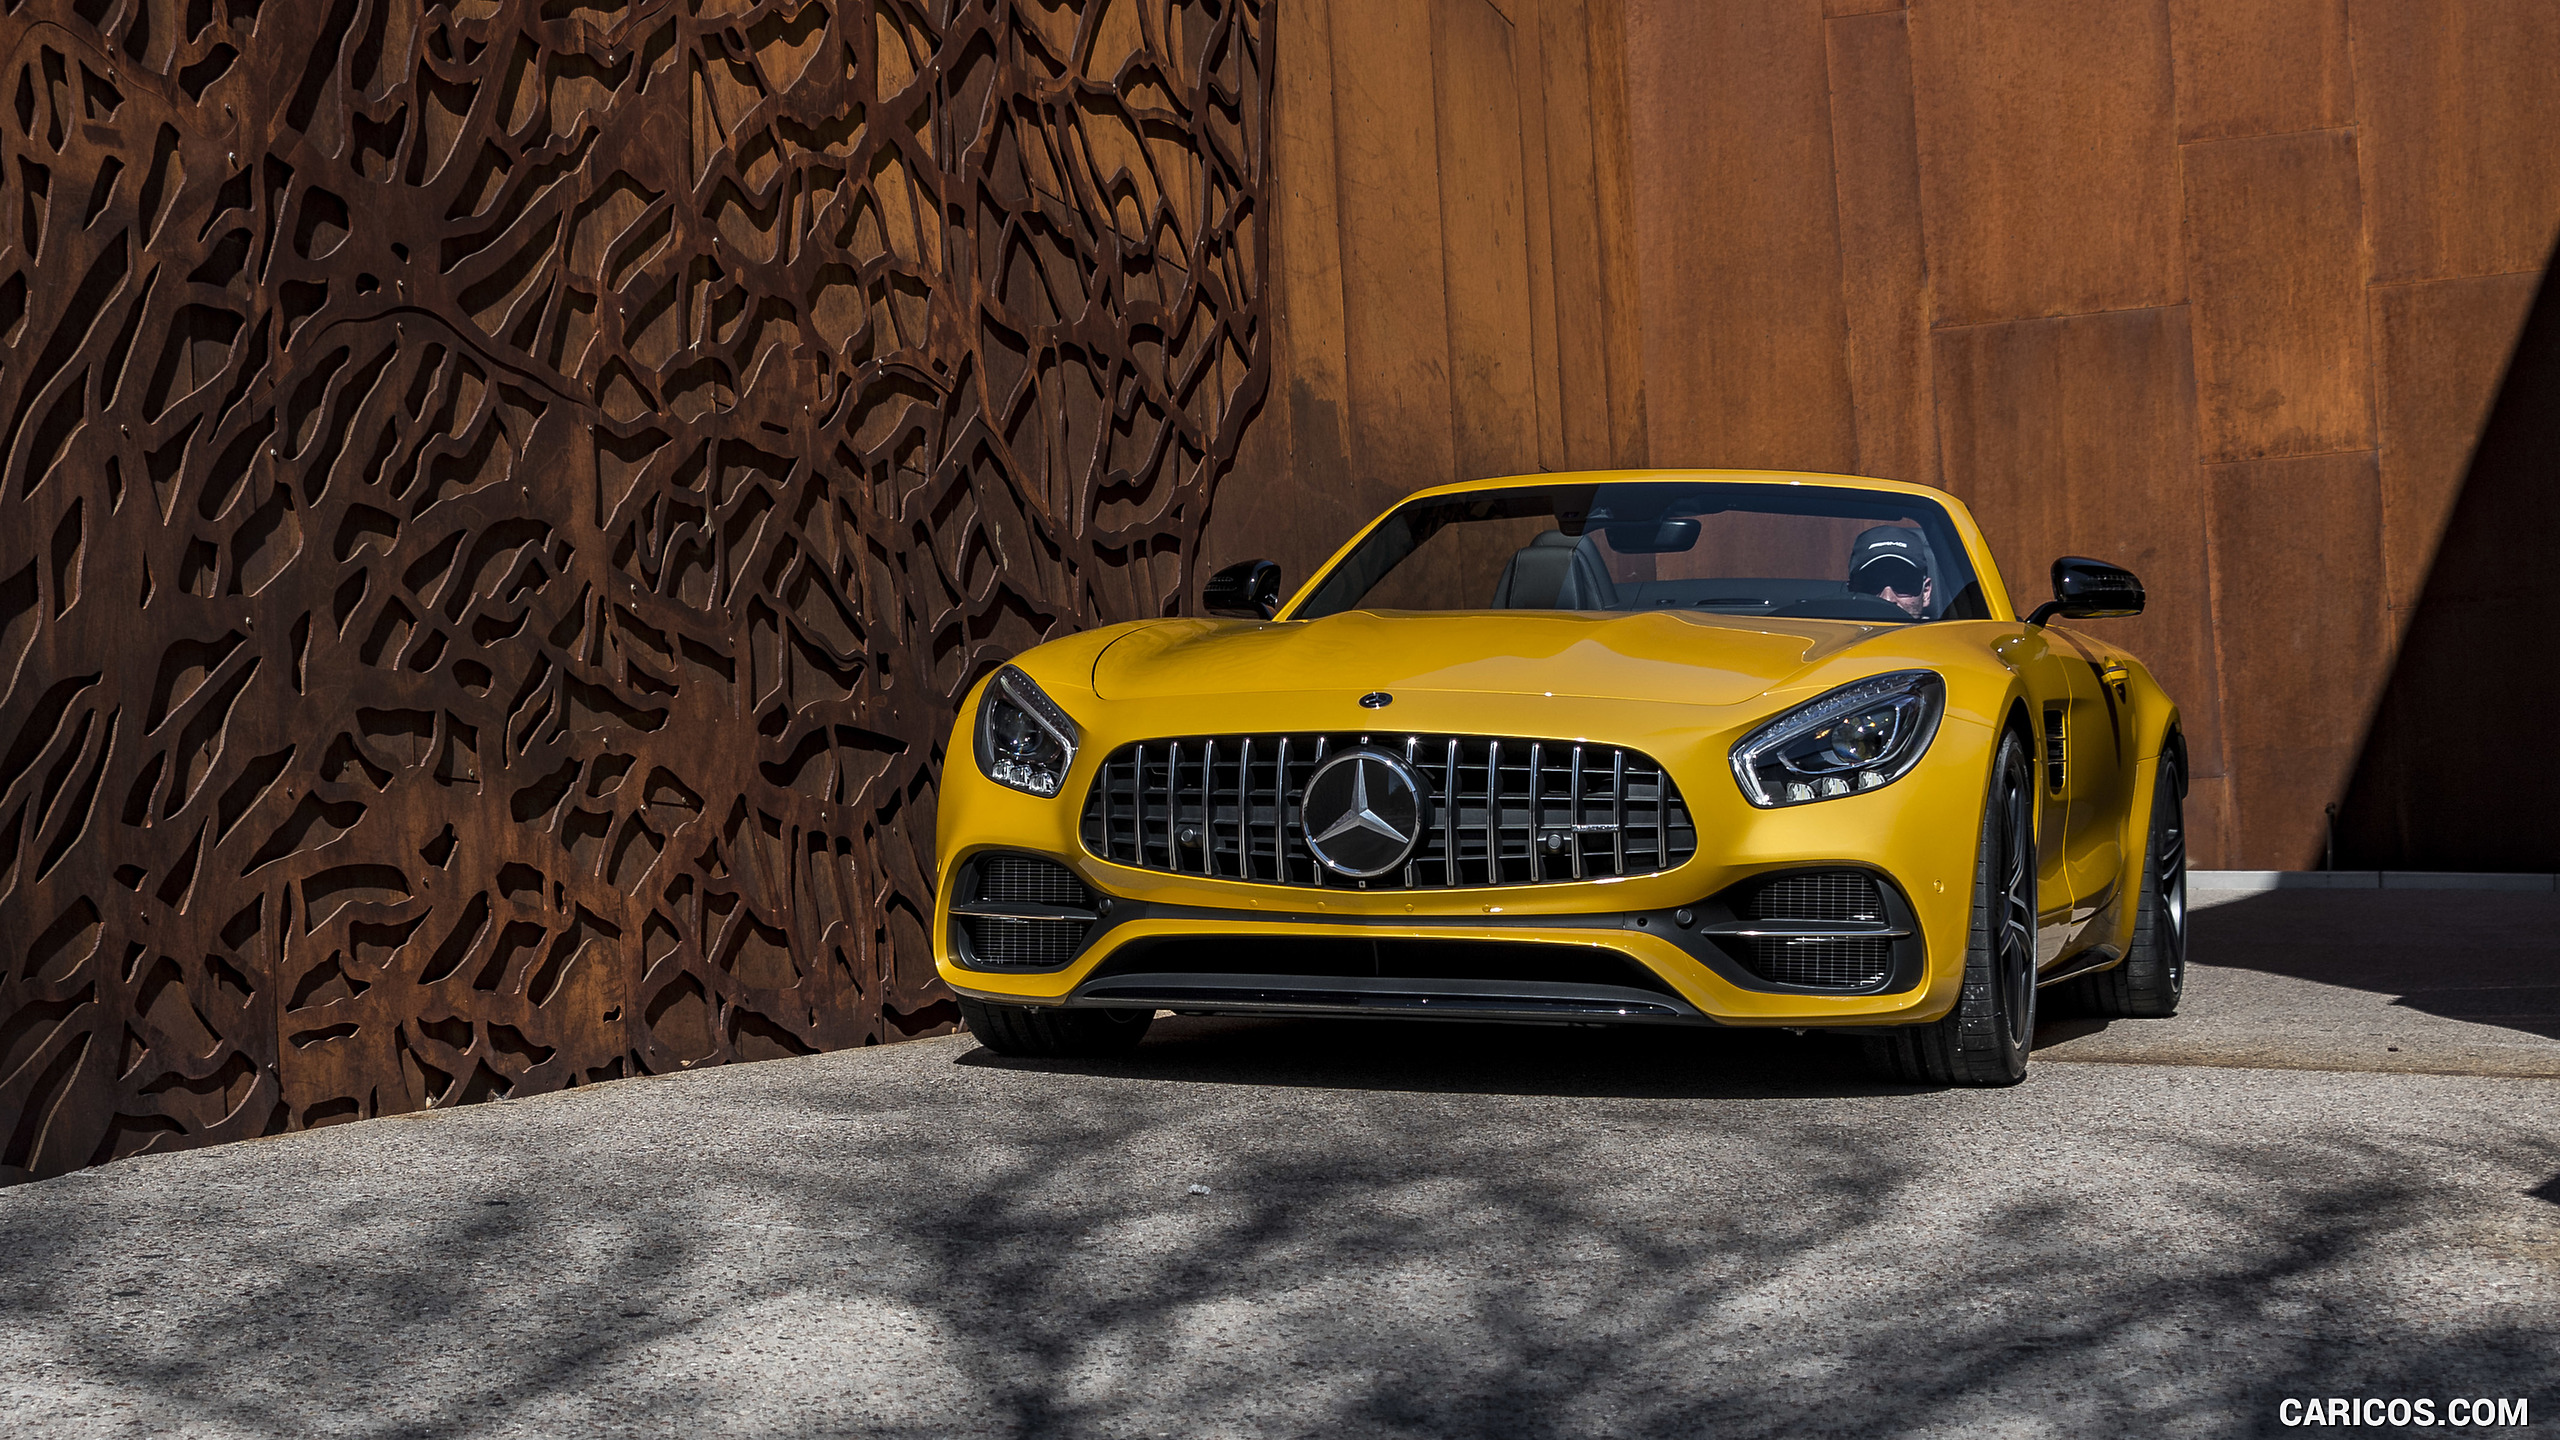 2018 Mercedes-AMG GT C Roadster - Front, #245 of 350